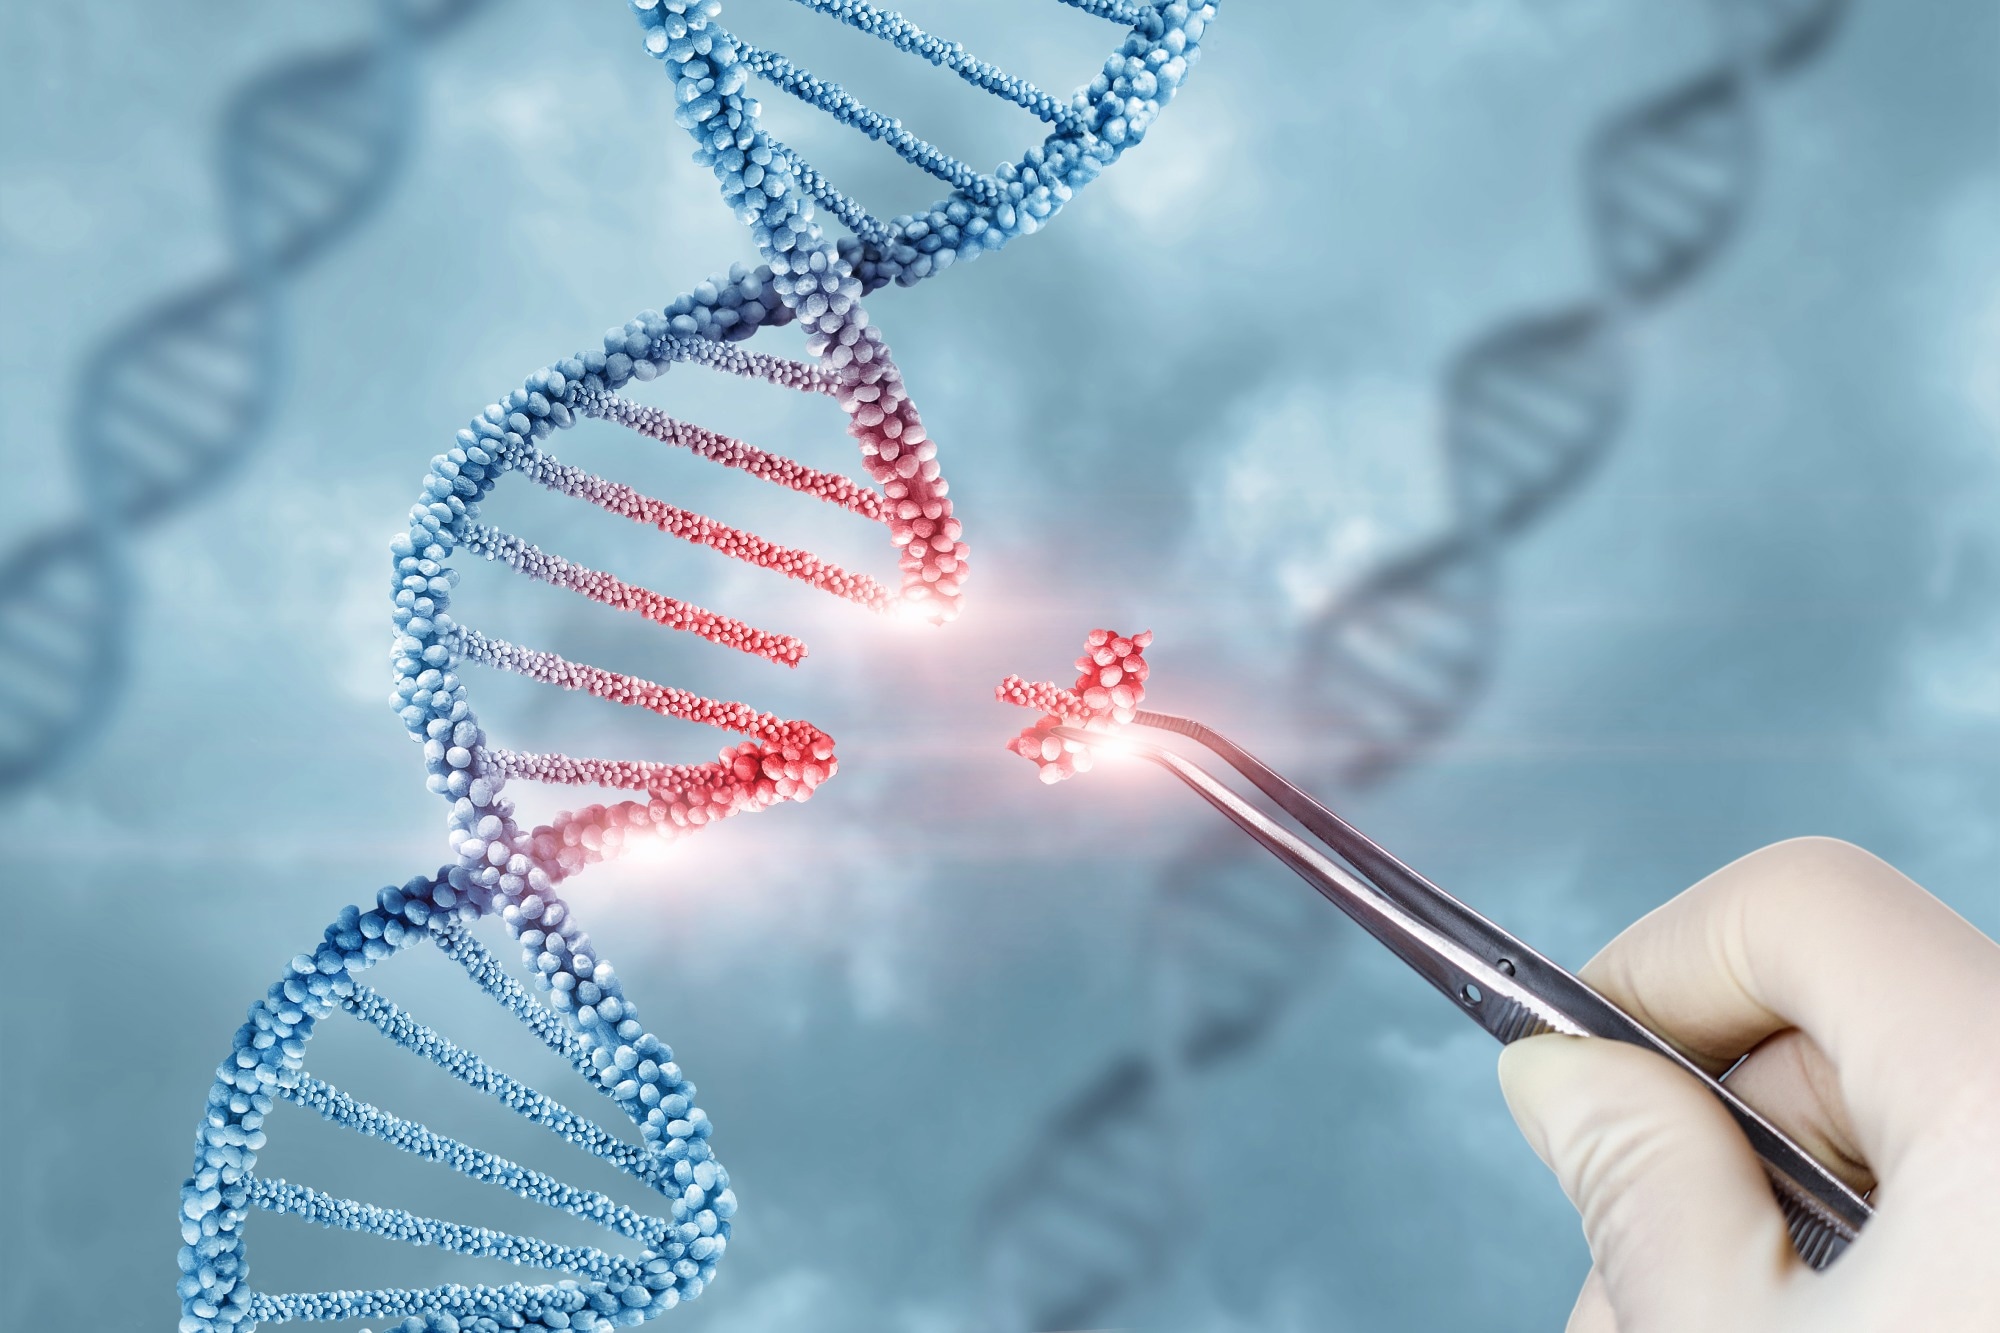 Study: Between desire and fear: a qualitative interview study exploring the perspectives of carriers of a genetic condition on human genome editing. Image Credit: Natali _ Mis/Shutterstock.com